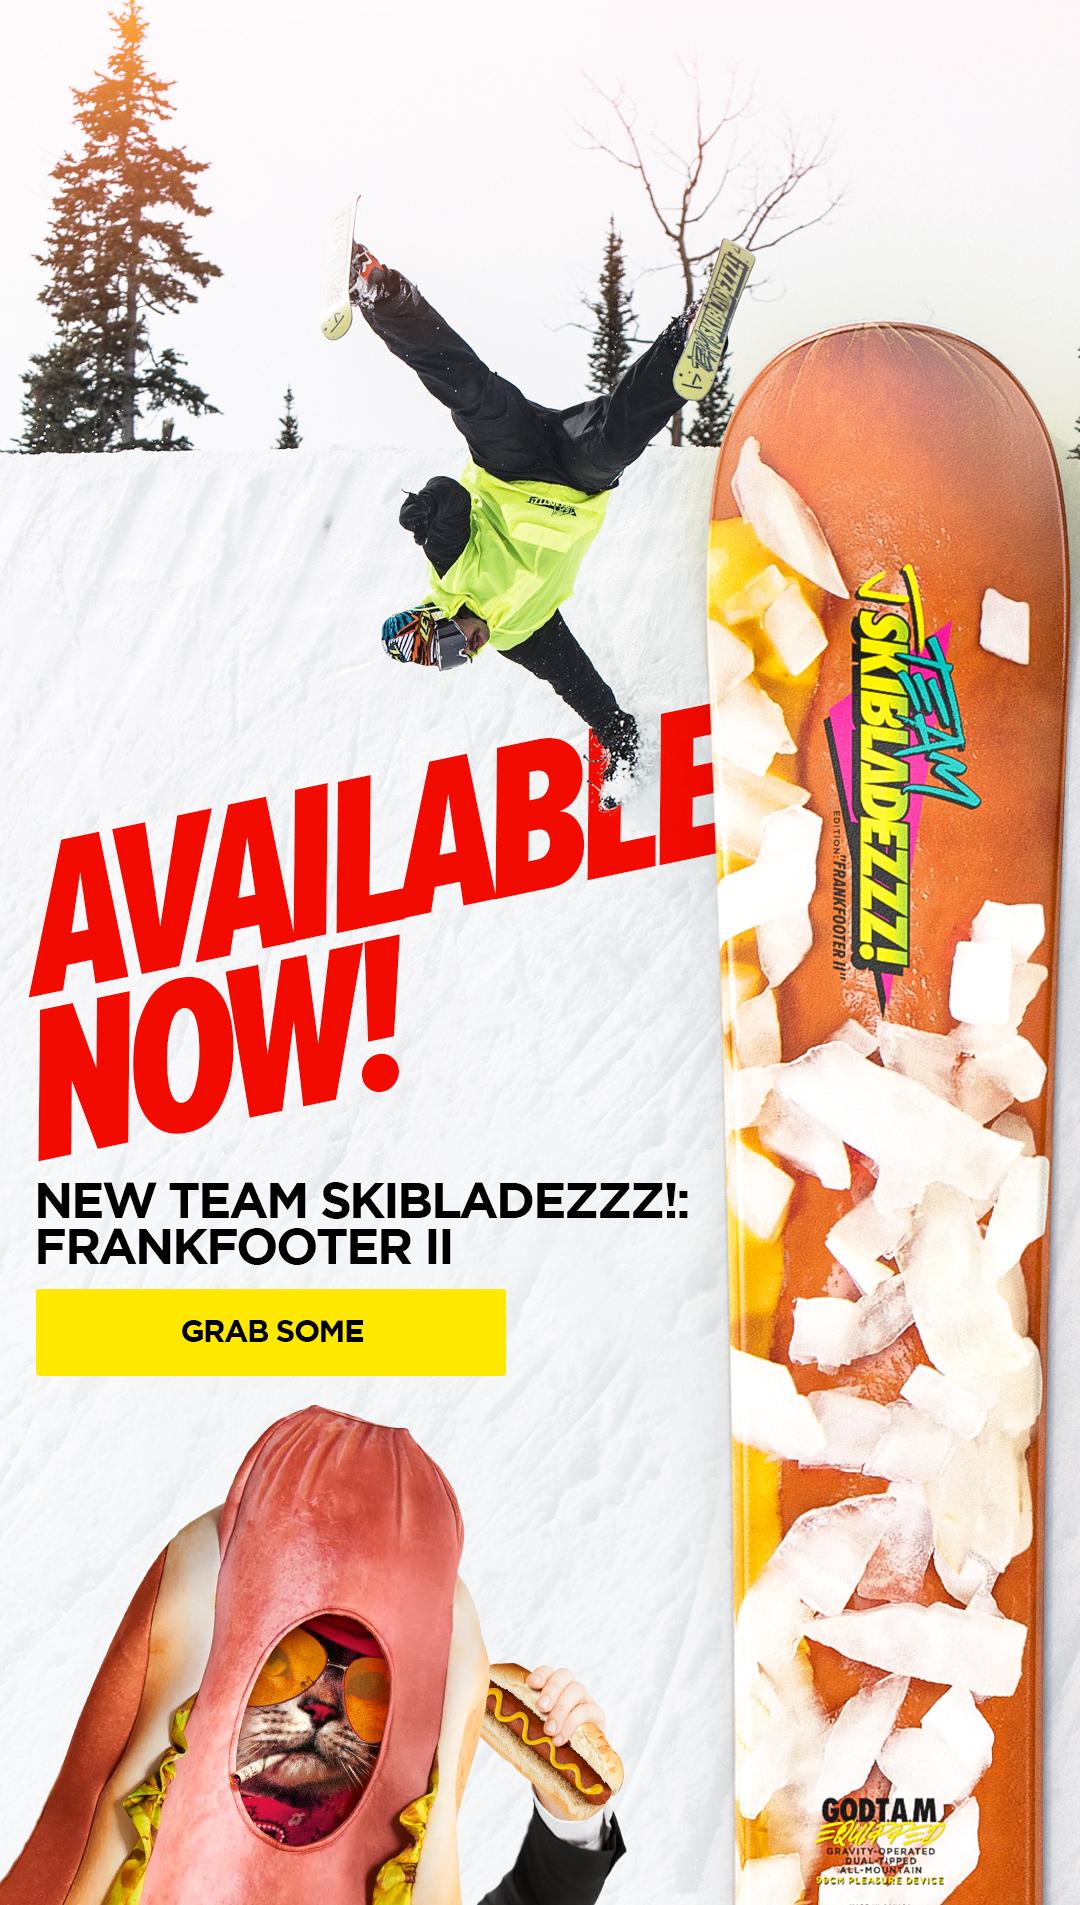 J skis Frankfooter II skibladezzz available now!